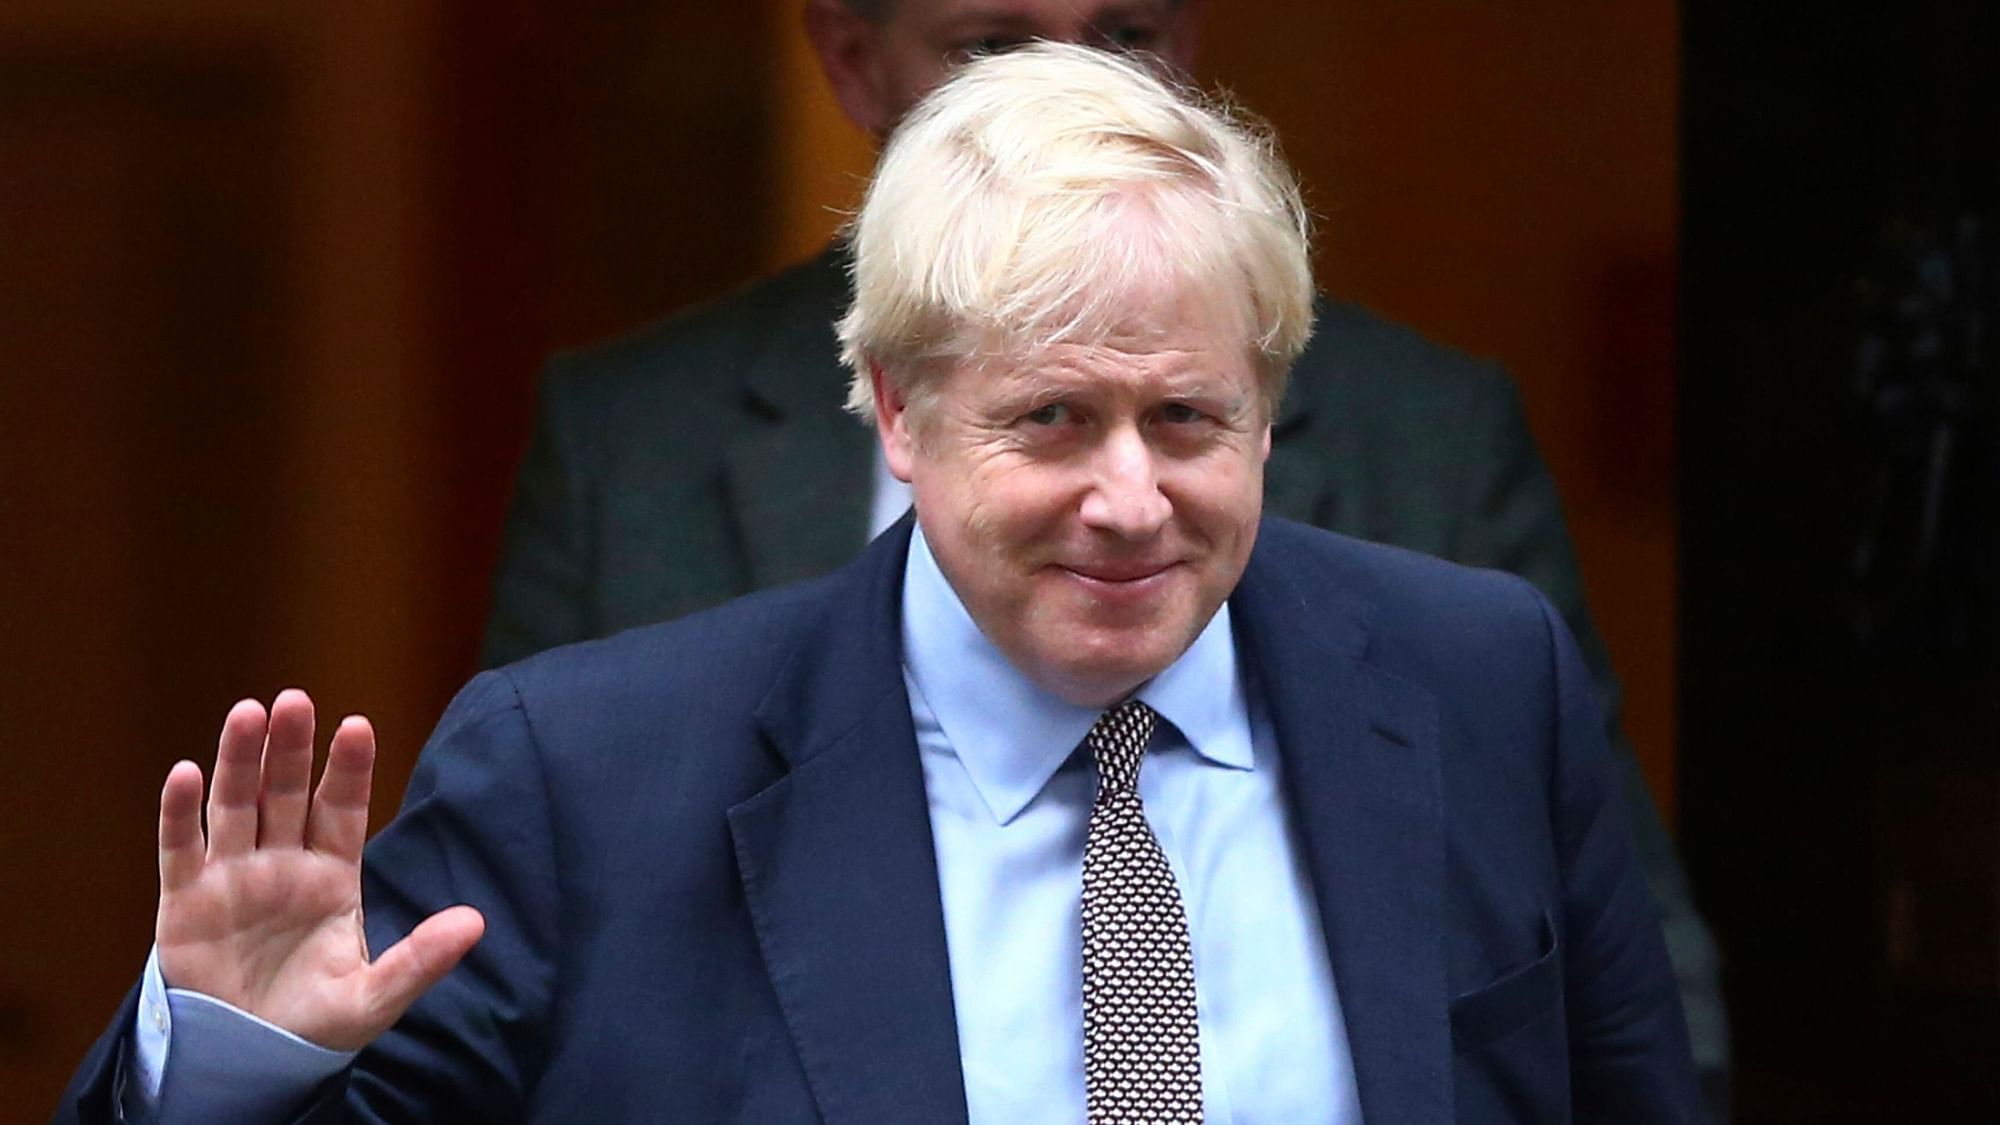 <div class="paragraphs"><p>Even as <a href="https://www.thequint.com/topic/uk-pm-boris-johnson">UK Prime Minister Boris Johnson</a> is on a two day <a href="https://www.thequint.com/voices/opinion/boris-johnson-in-india-what-does-the-embattled-uk-pm-hope-to-gain-from-the-visit">bilateral visit to India</a>, the House of Commons committee is set to probe him over allegations of whether he misled the parliament about attending illegal parties at Downing Street during the COVID-19 lockdown.</p></div>